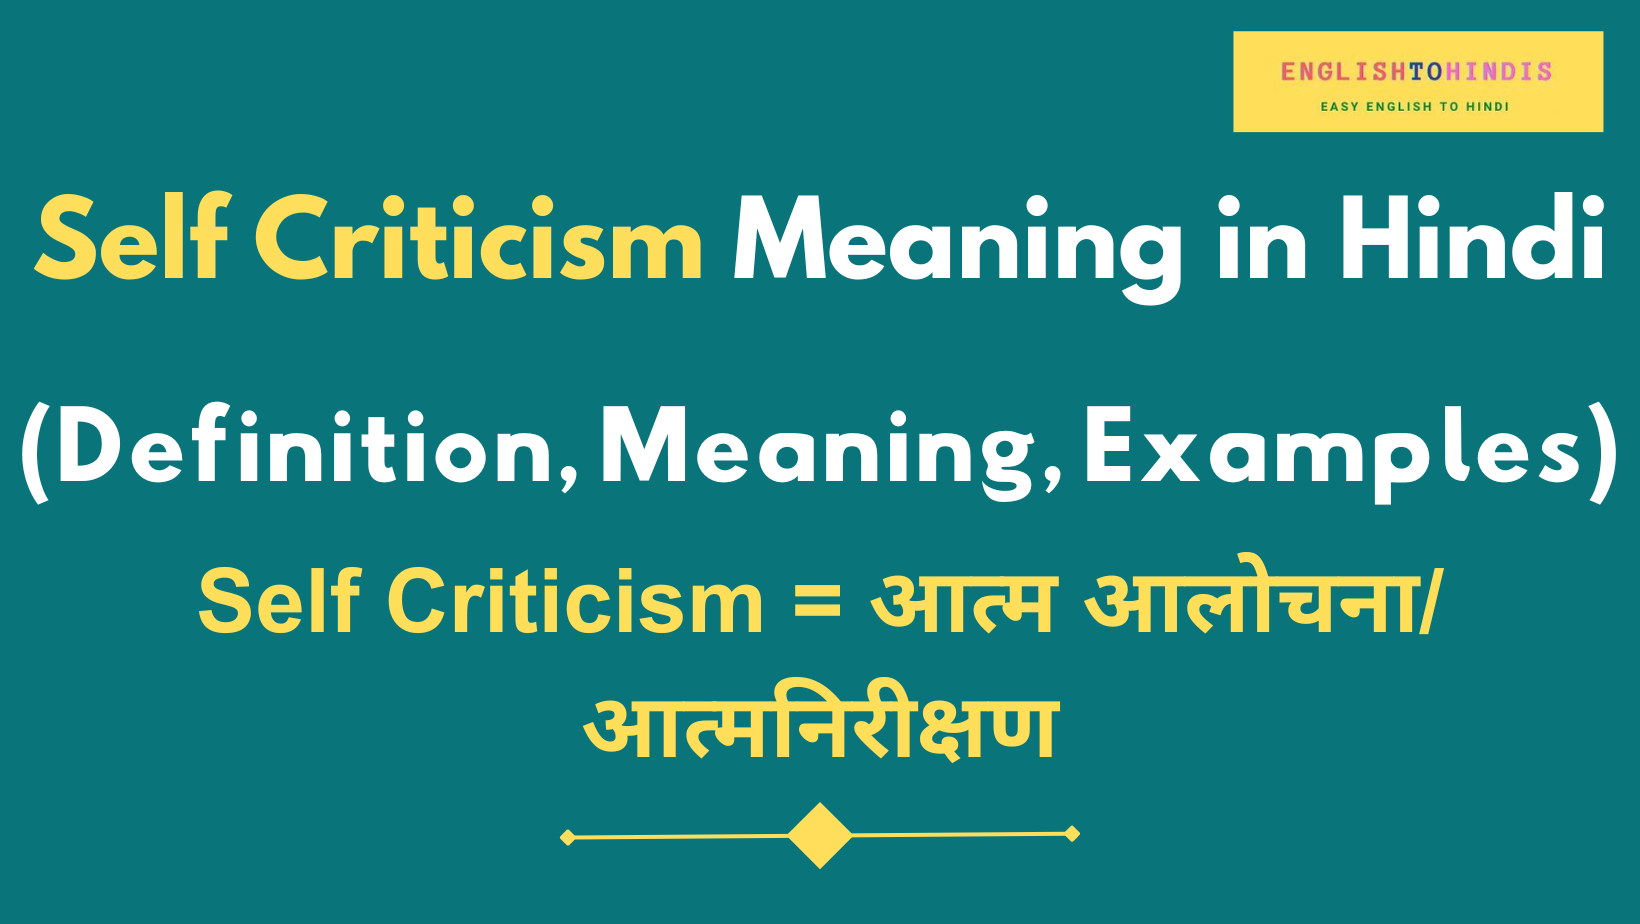 Self Criticism Meaning in Hindi